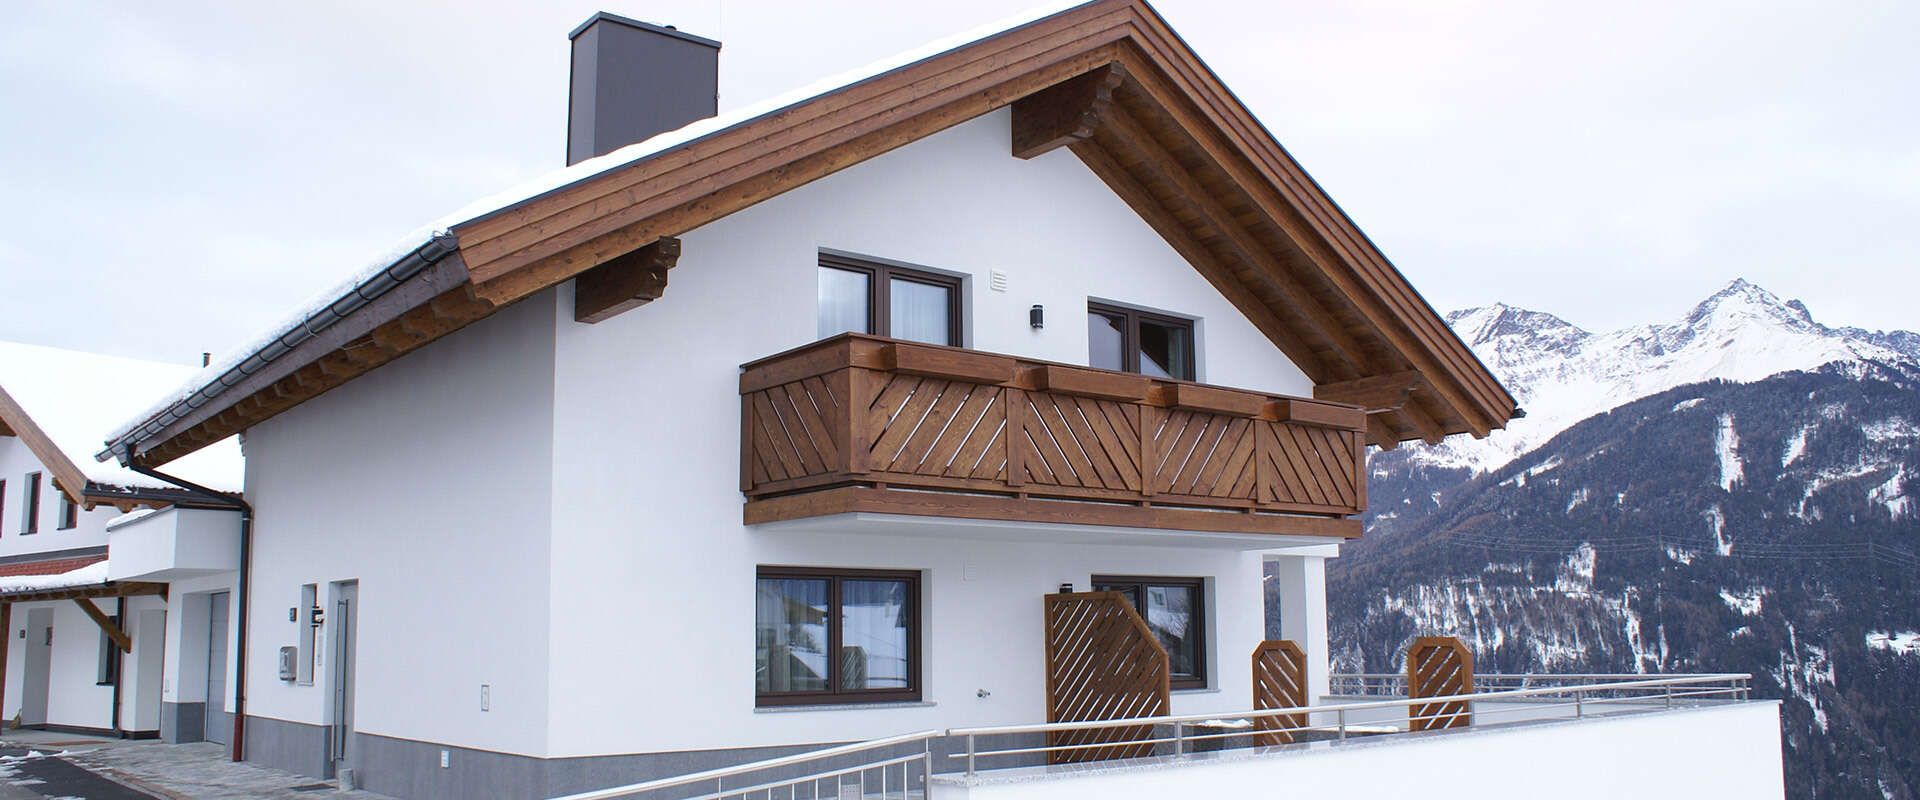 Apart Wolf with holiday apartments in Fiss, Tyrol